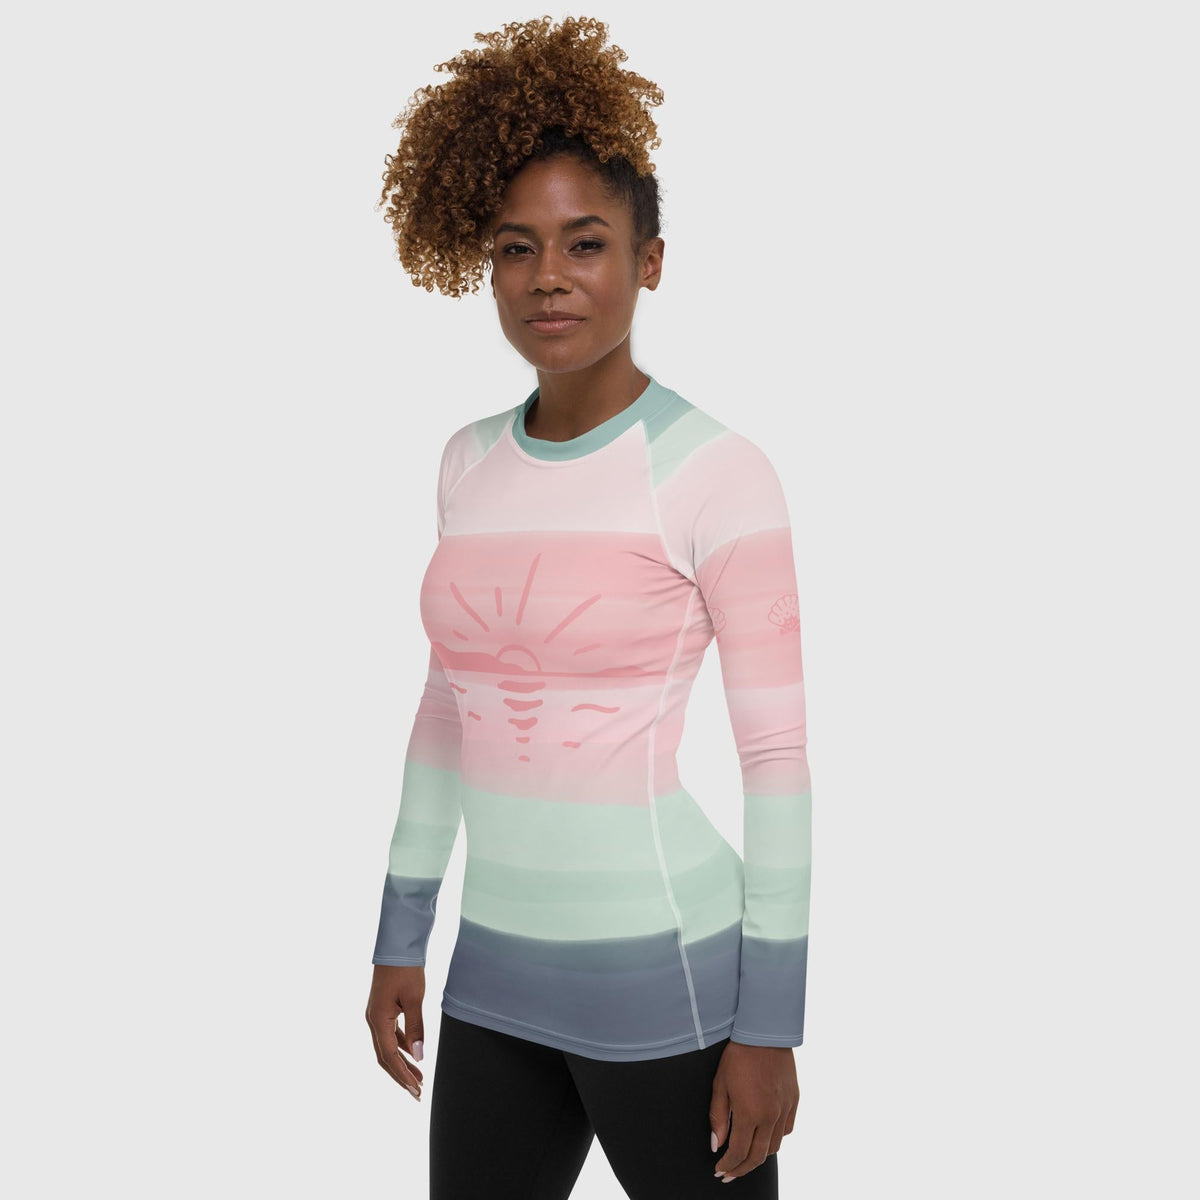 Women&#39;s Rash Guard Striped - Revive Wear     Women&#39;s Striped Rash Guard. This rainbow-striped rash guard keeps the sun off your skin during long days of paddling, swimming or beachcombing. Shop your size today.